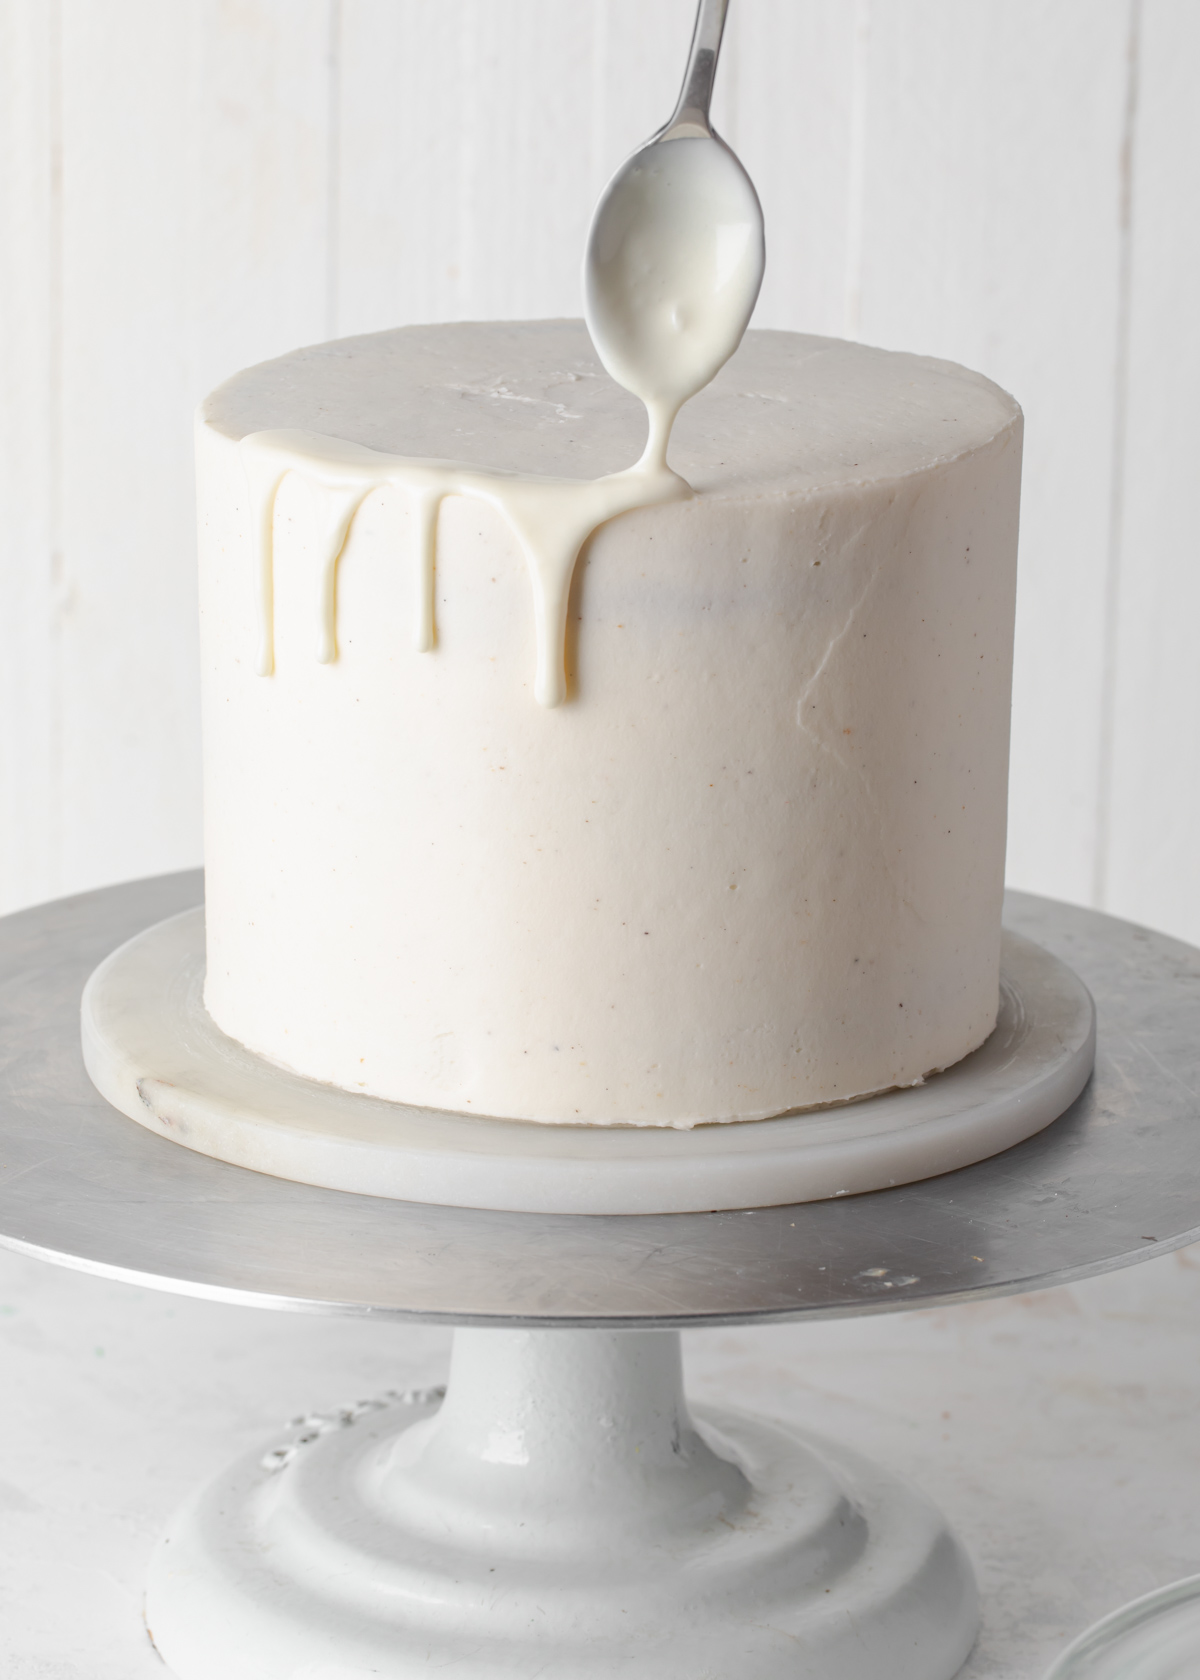 Adding a white chocolate drip to a frosted cake